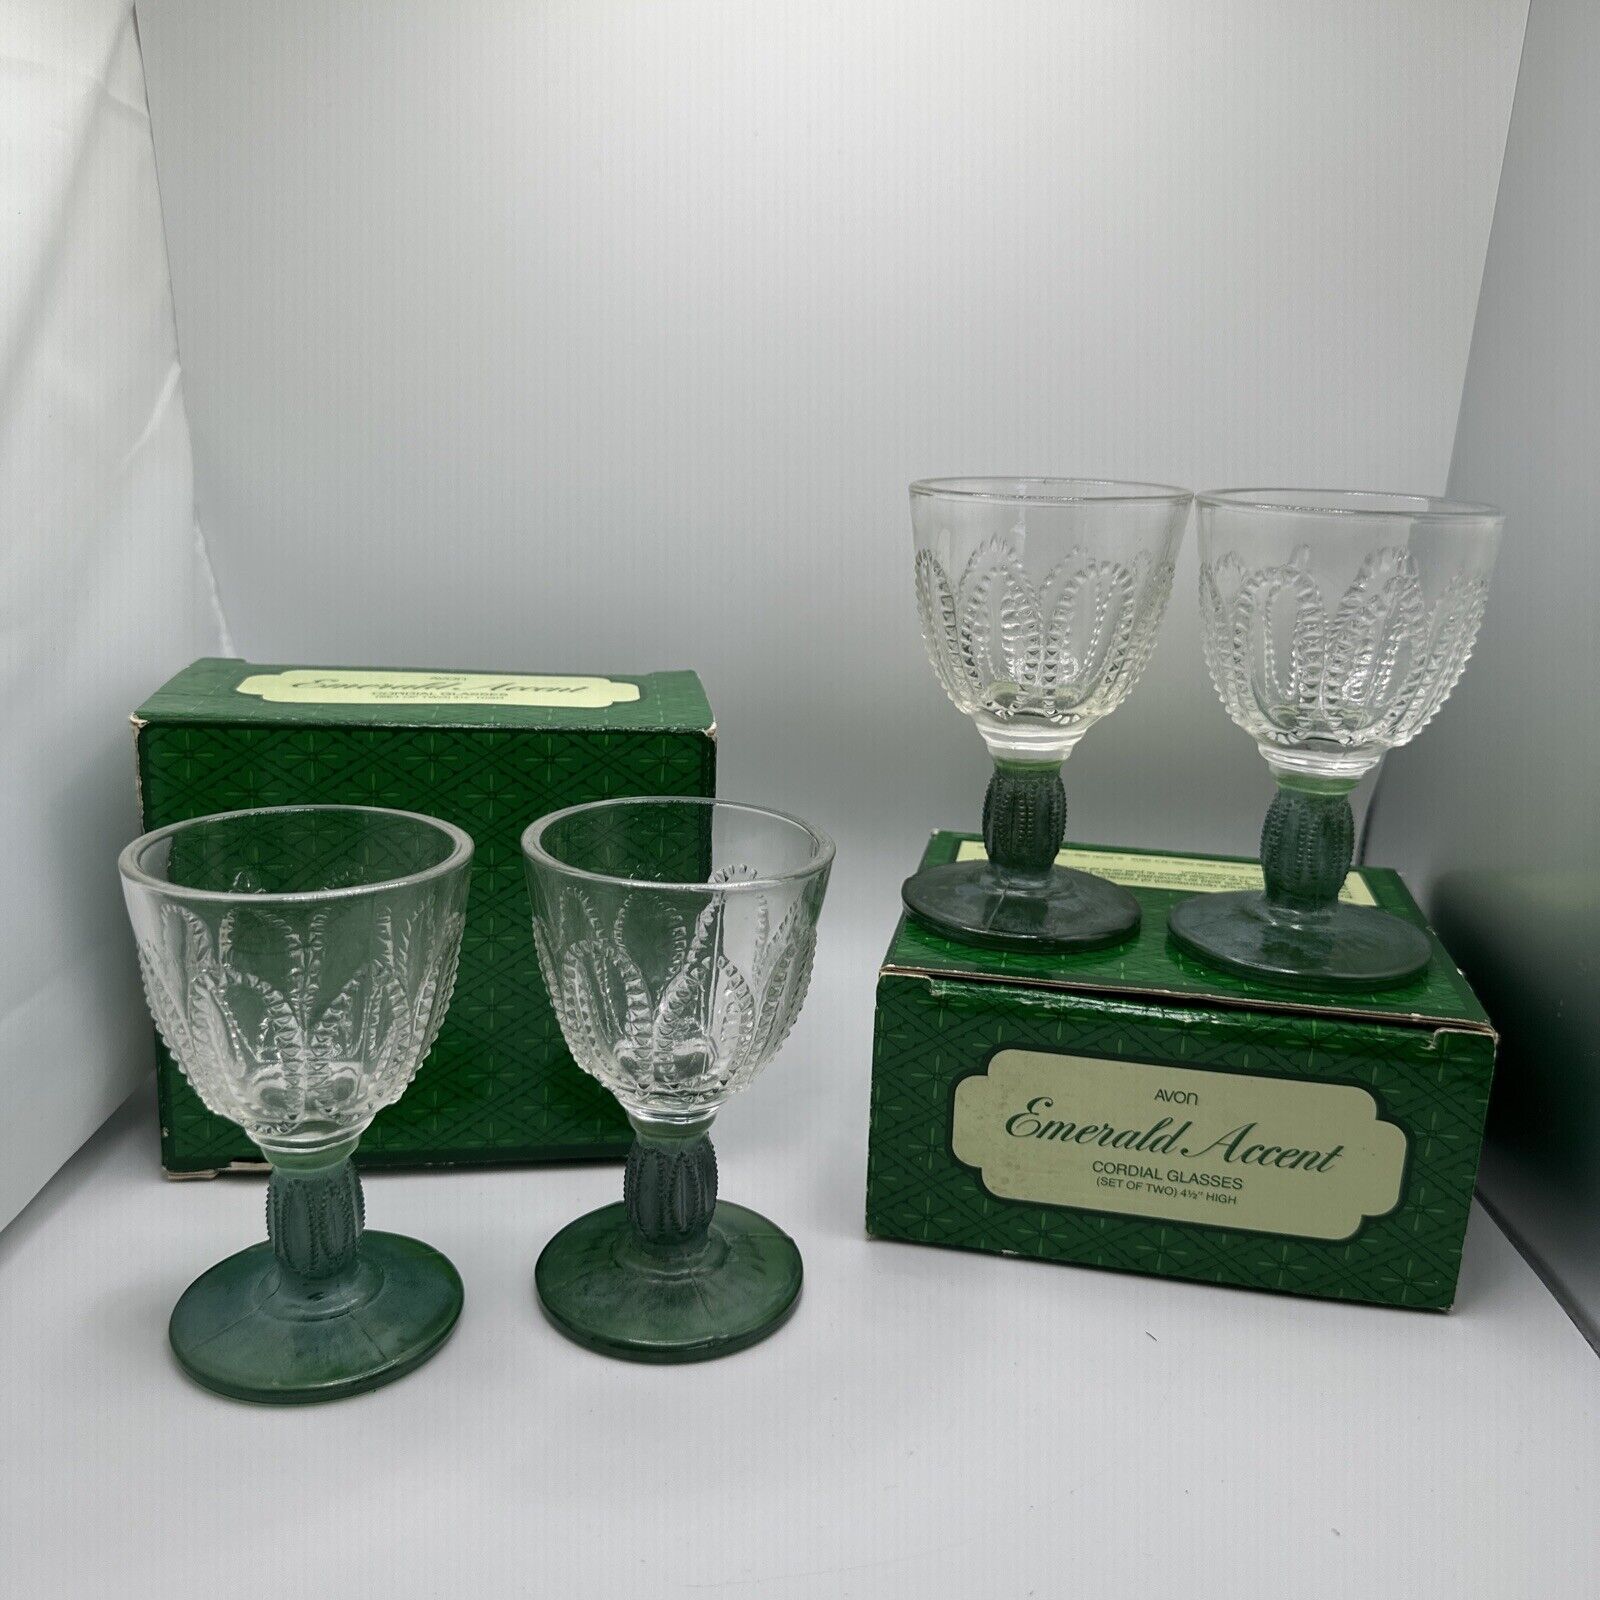 Two VINTAGE AVON 1982 EMERALD ACCENT CORDIAL GLASSES SETS OF 2